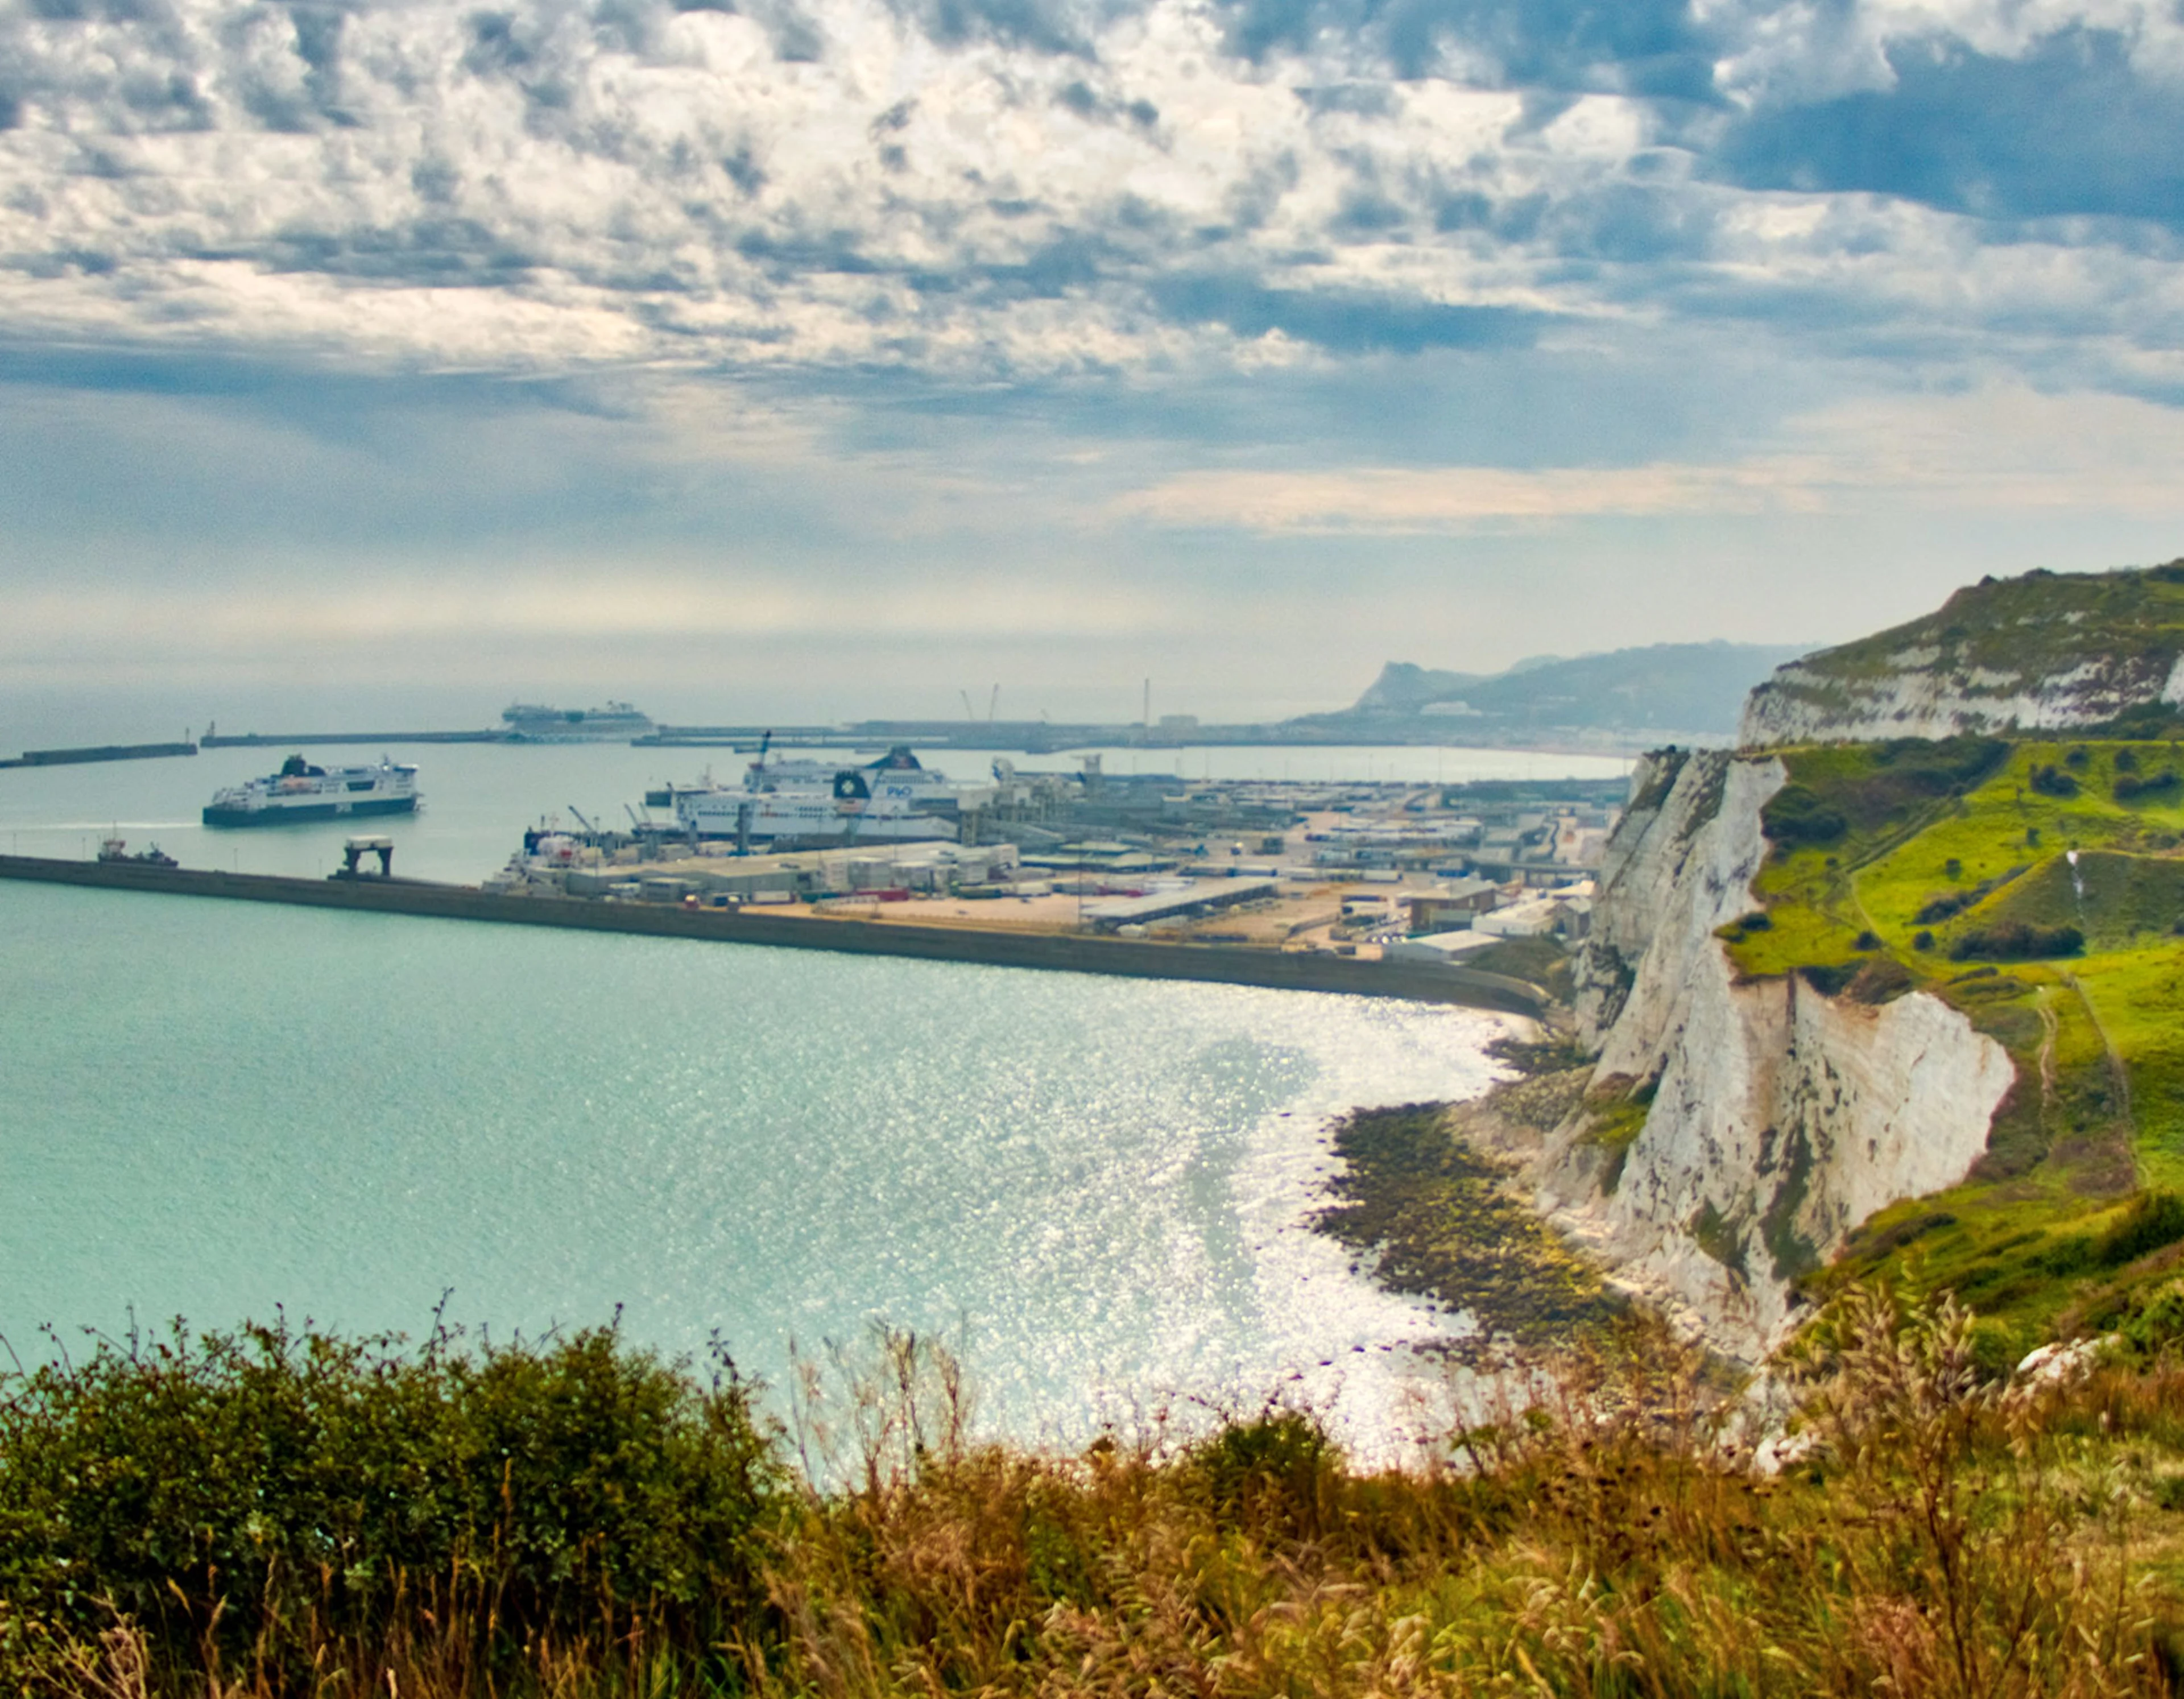 Ship in Harbour in Dover, Sea to the left, white cliffs to the right.